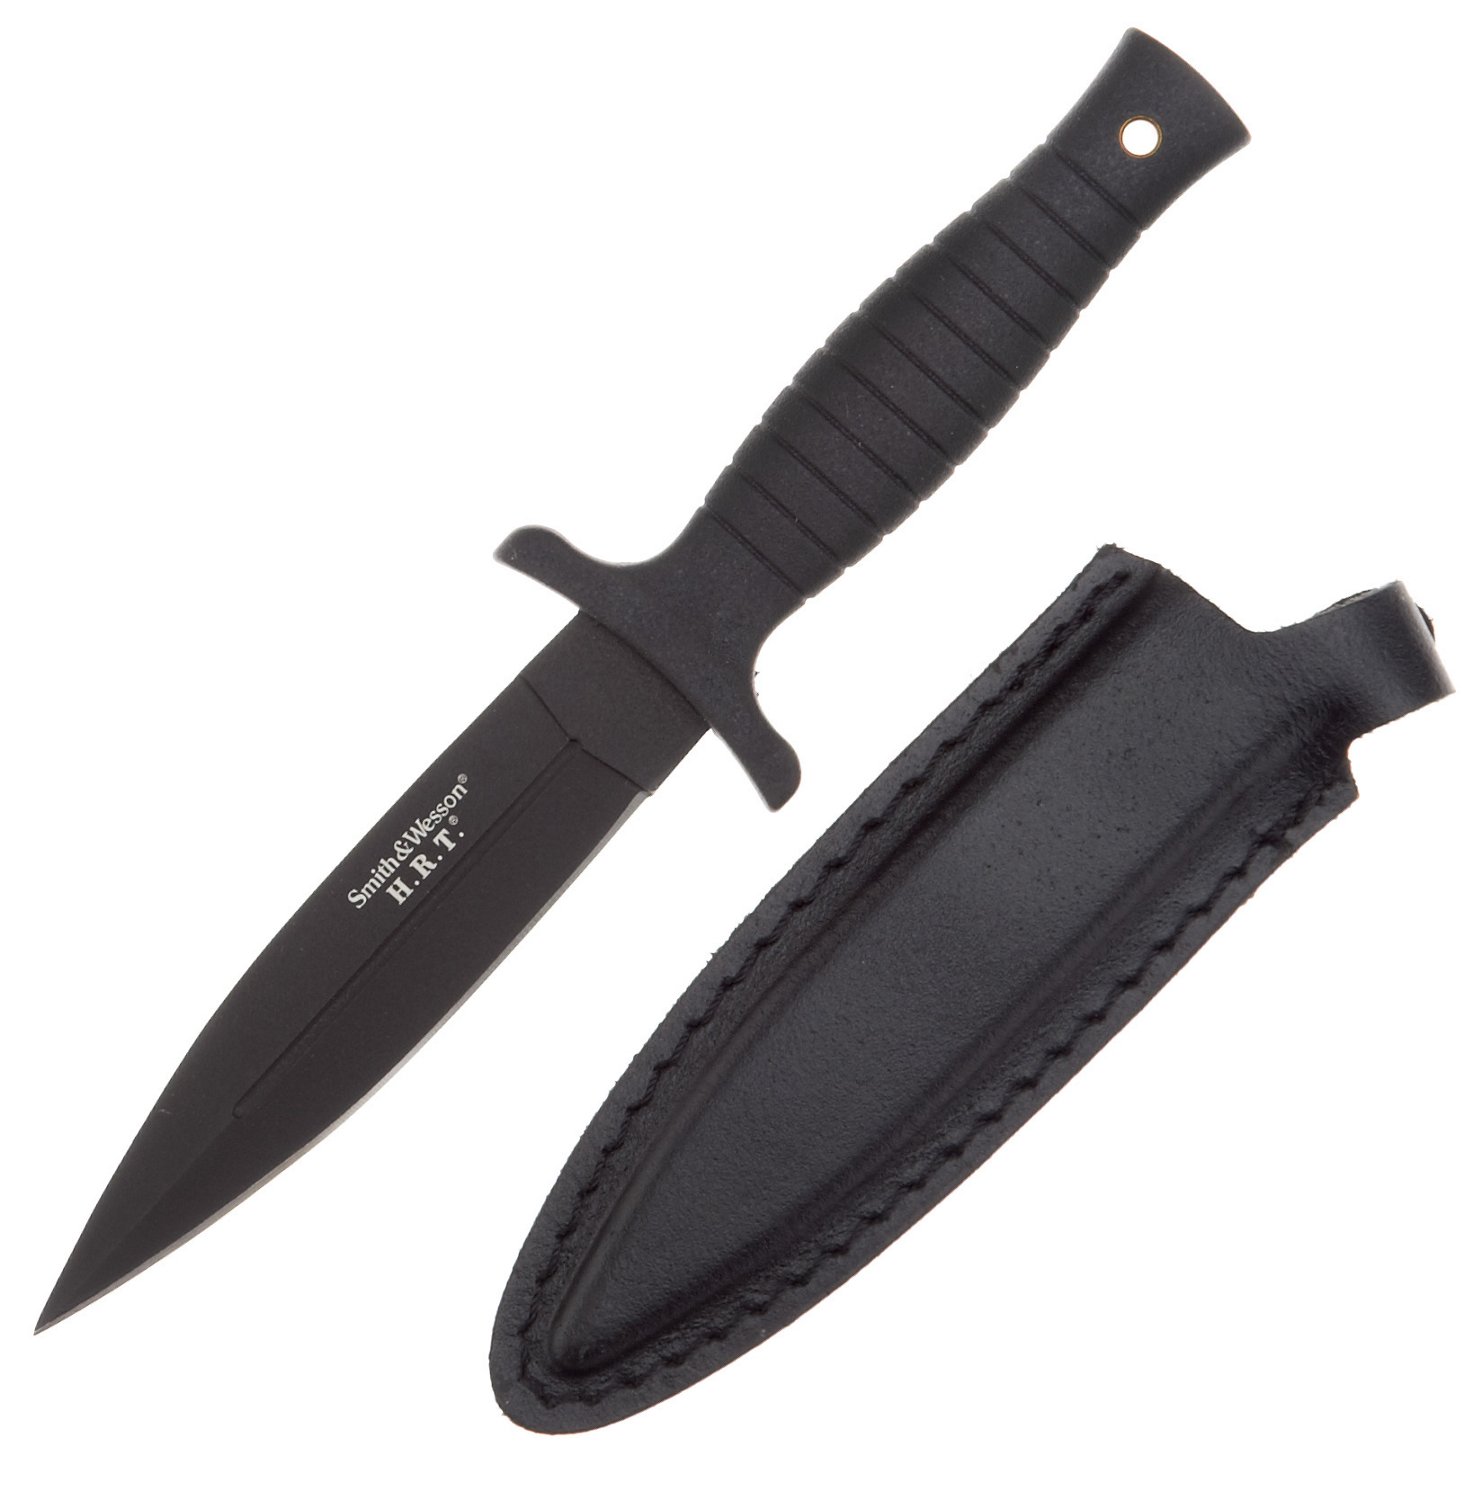  Black Sierra Equipment Skinner Knife Making Kit, Hammered  Finish Fixed Blade for Hunting & Fishing, Build Your Own Knives for Sports  & Outdoors : Sports & Outdoors